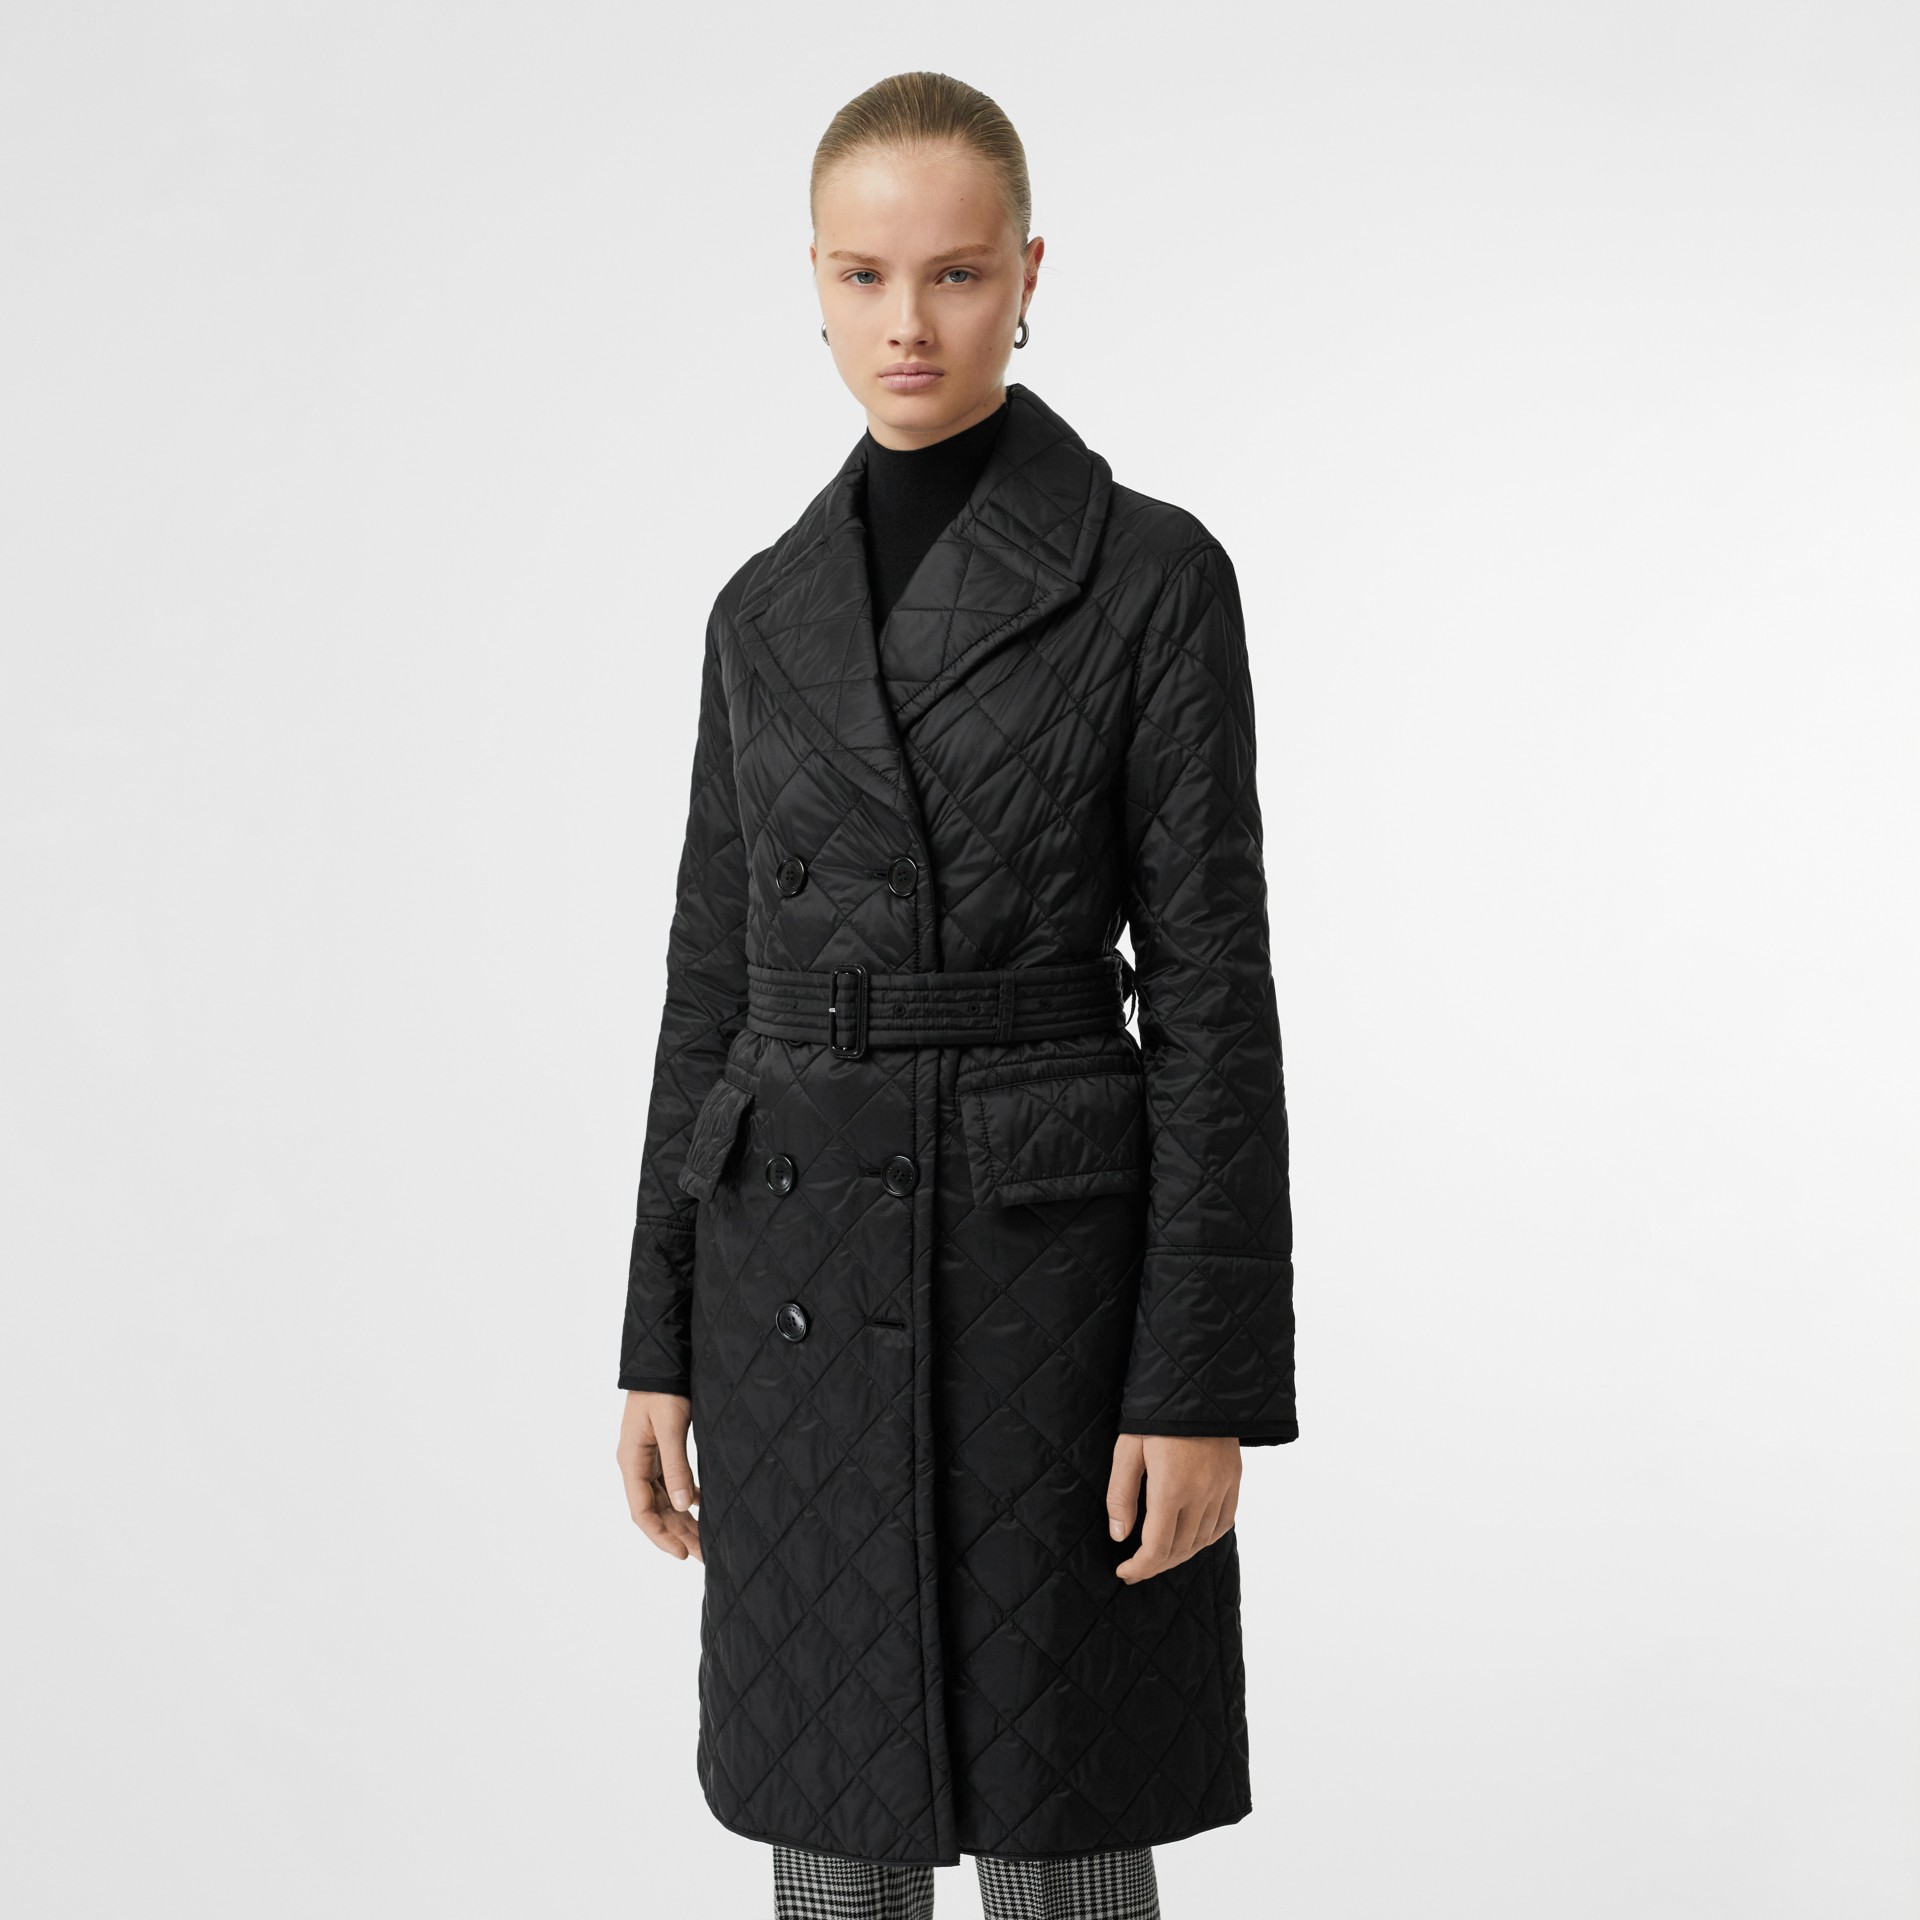 Lightweight Diamond Quilted Coat in Black - Women | Burberry United States